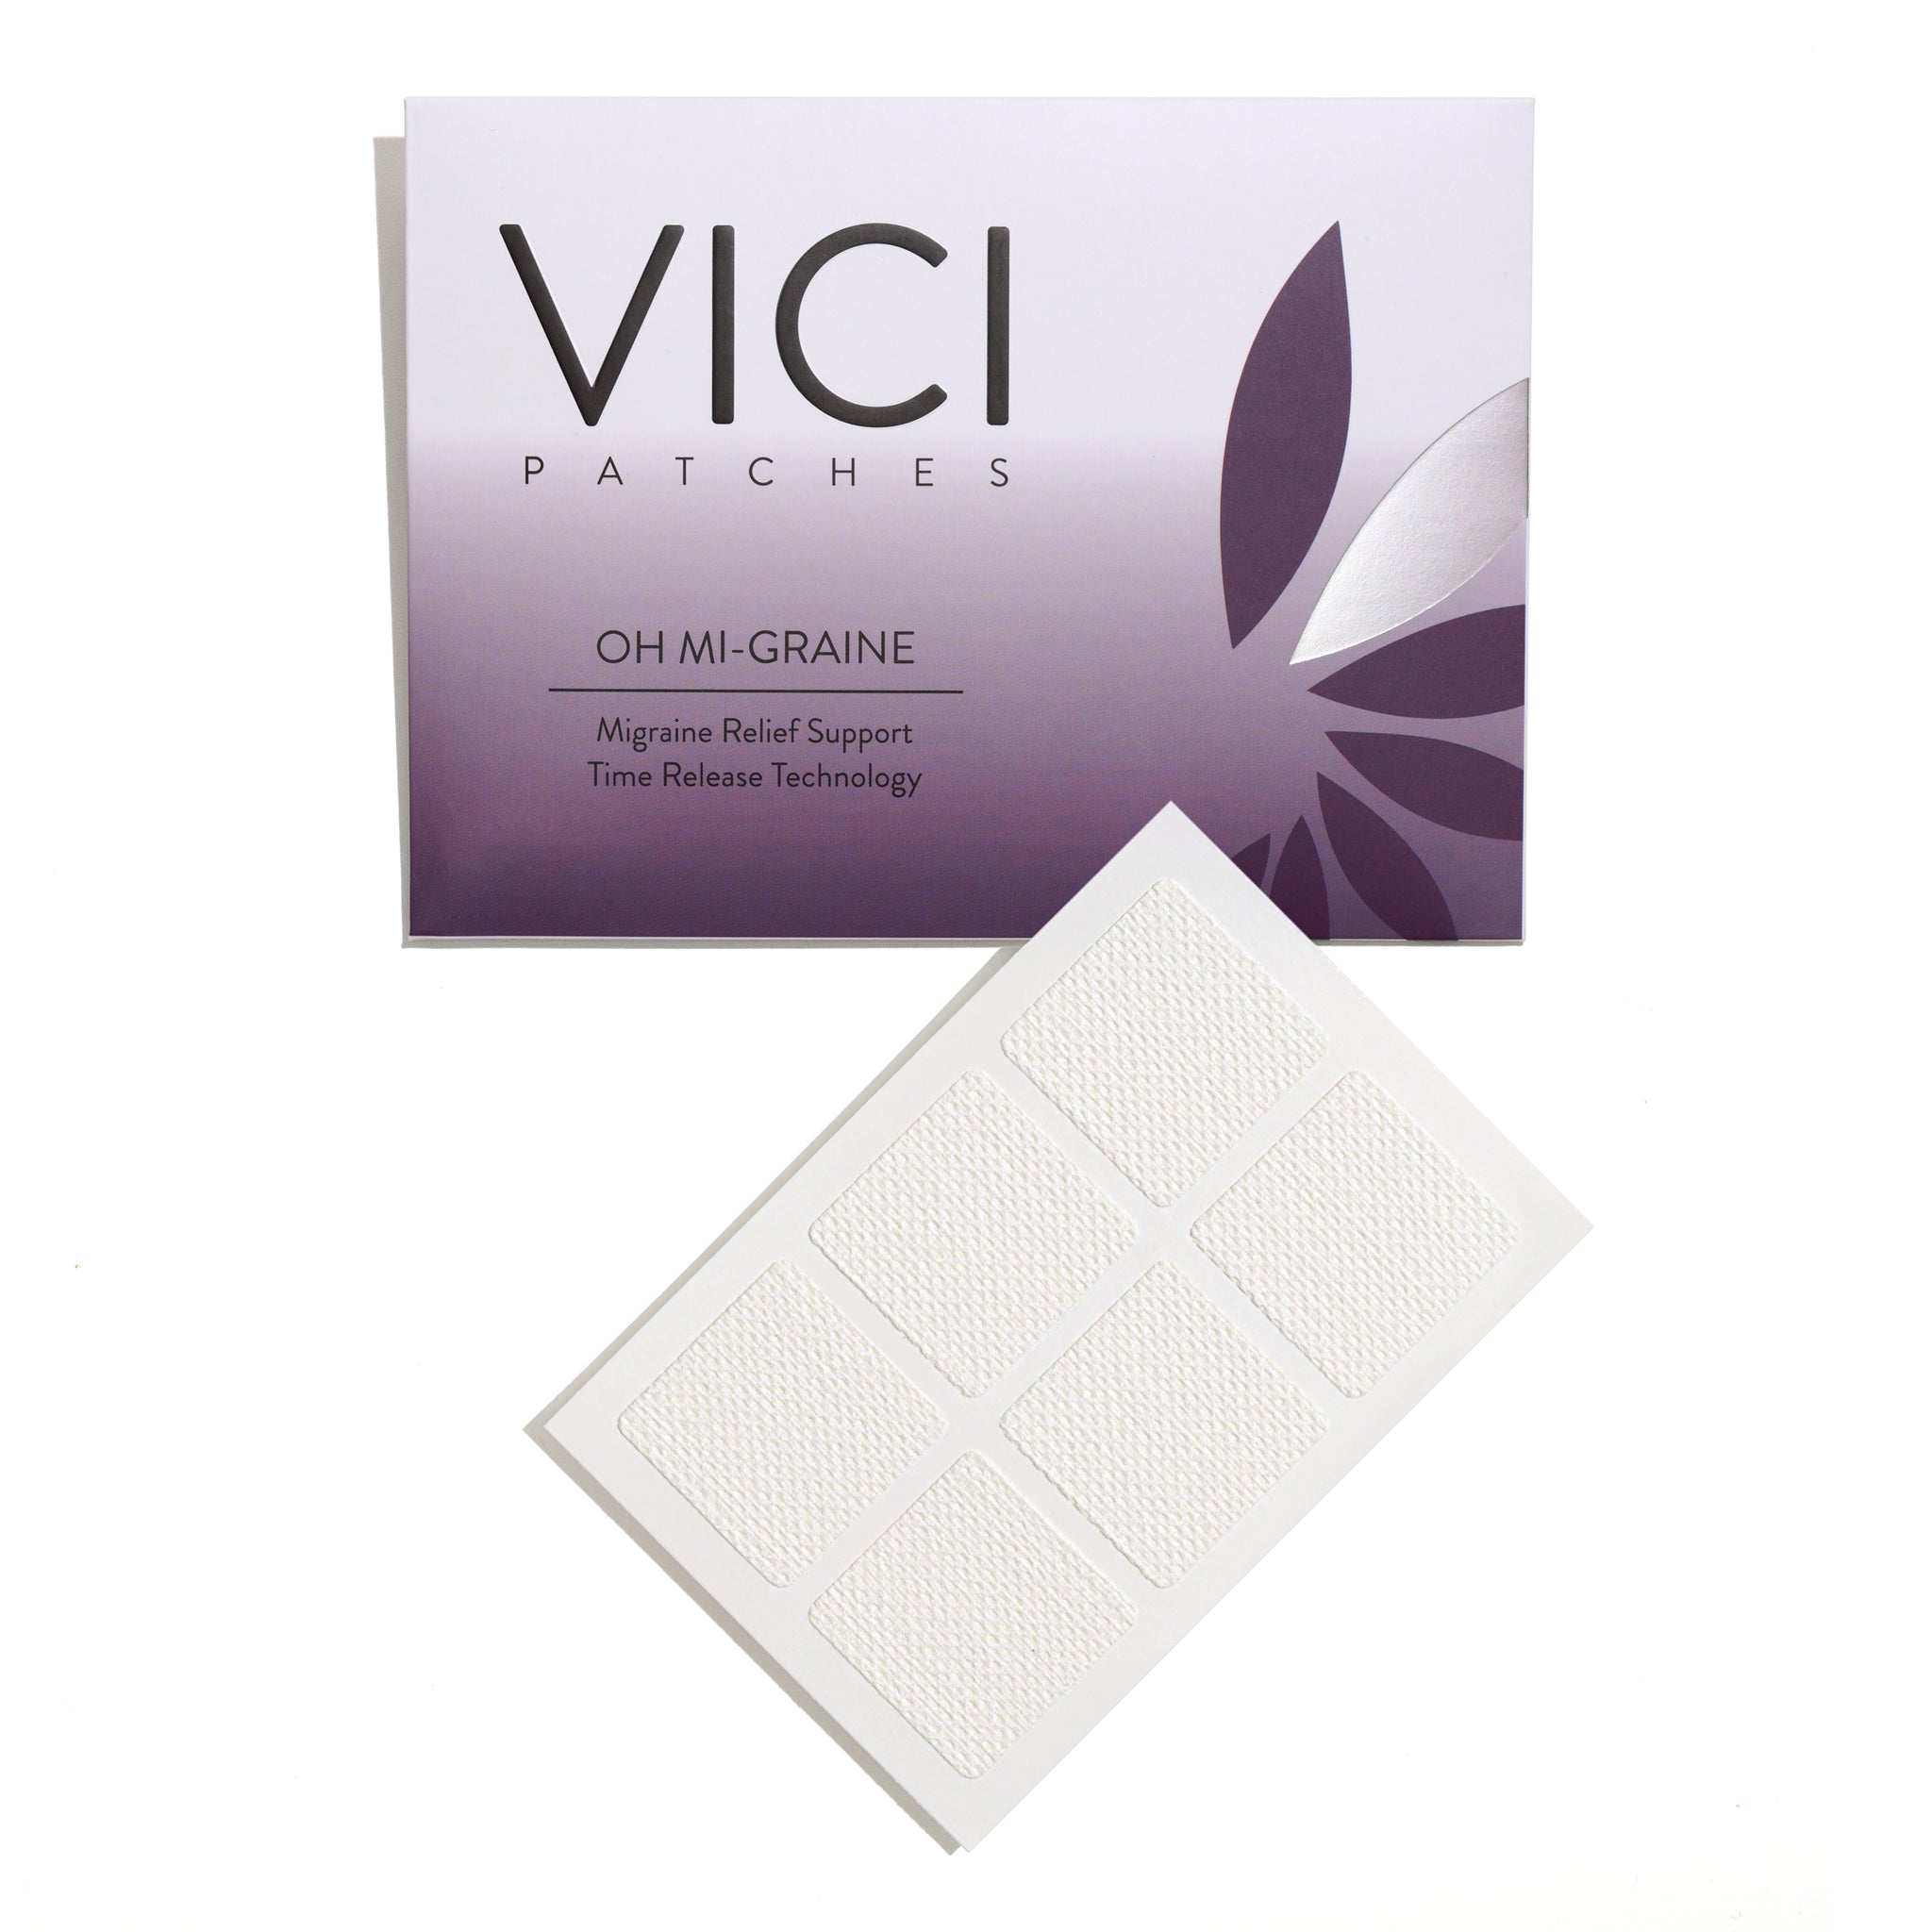 Top Rated! - Oh Mi-Graine Topical Patch